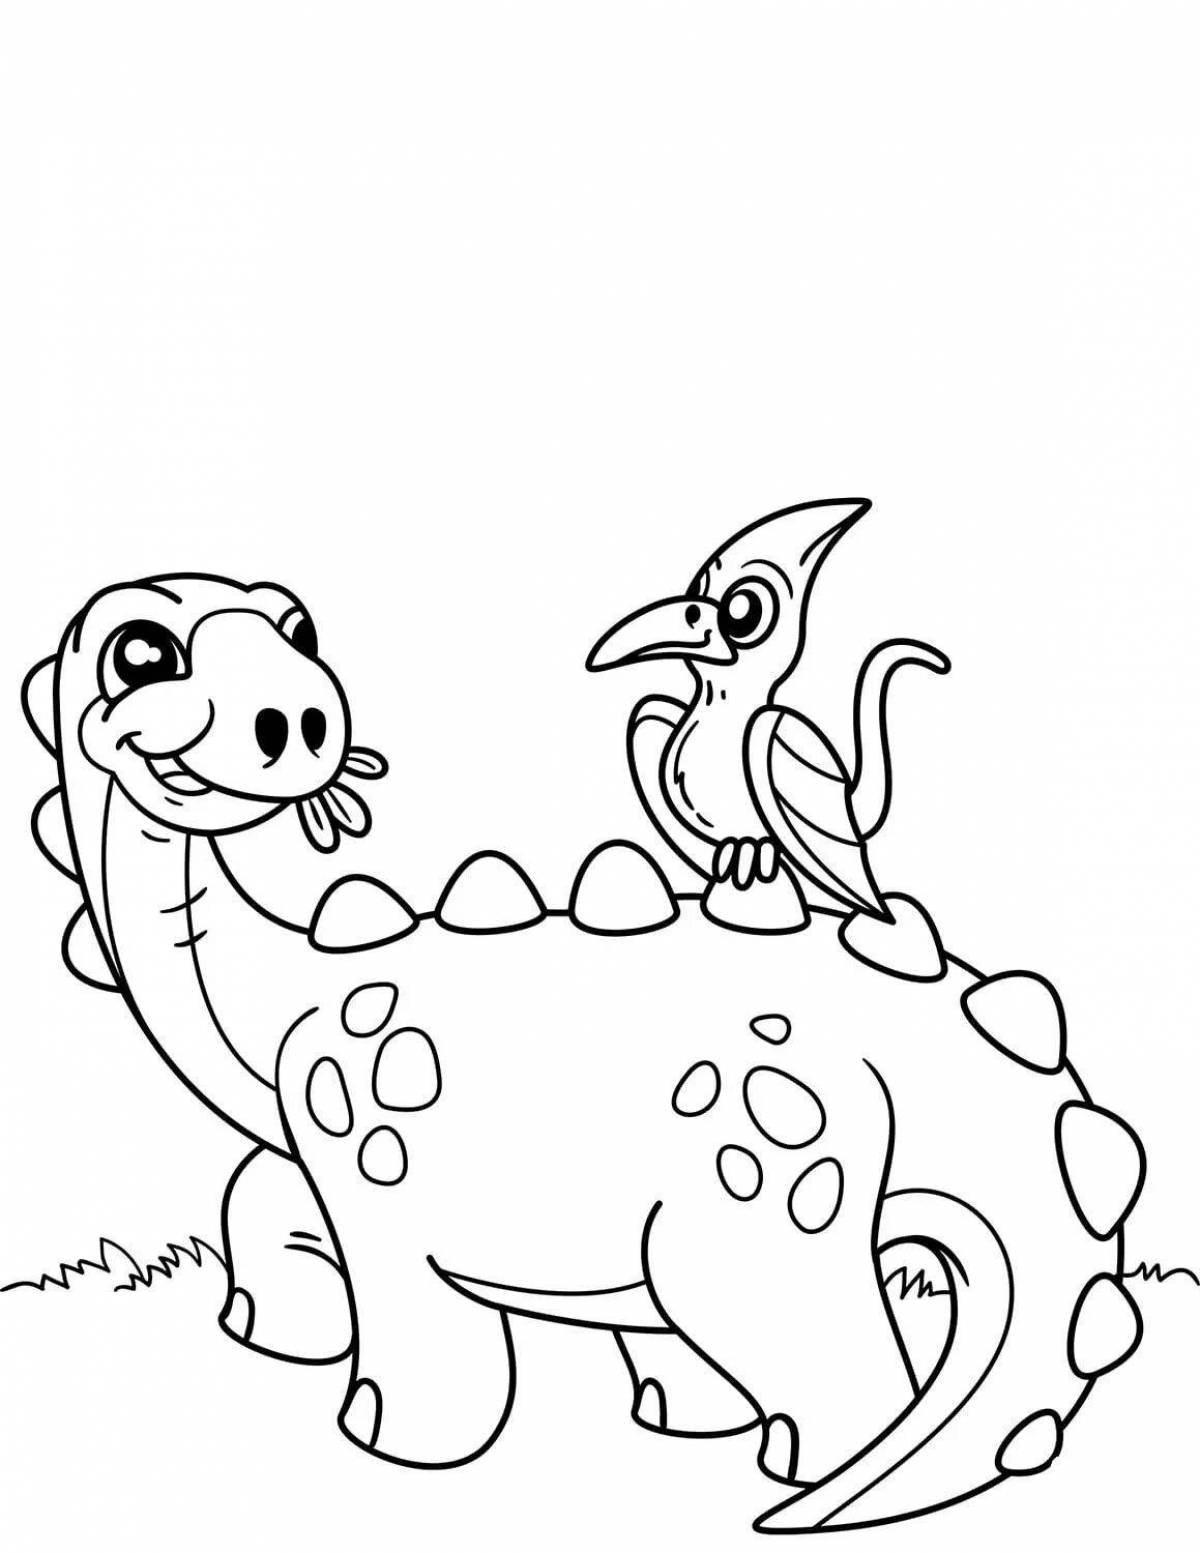 Majestic dinosaur coloring pages for kids